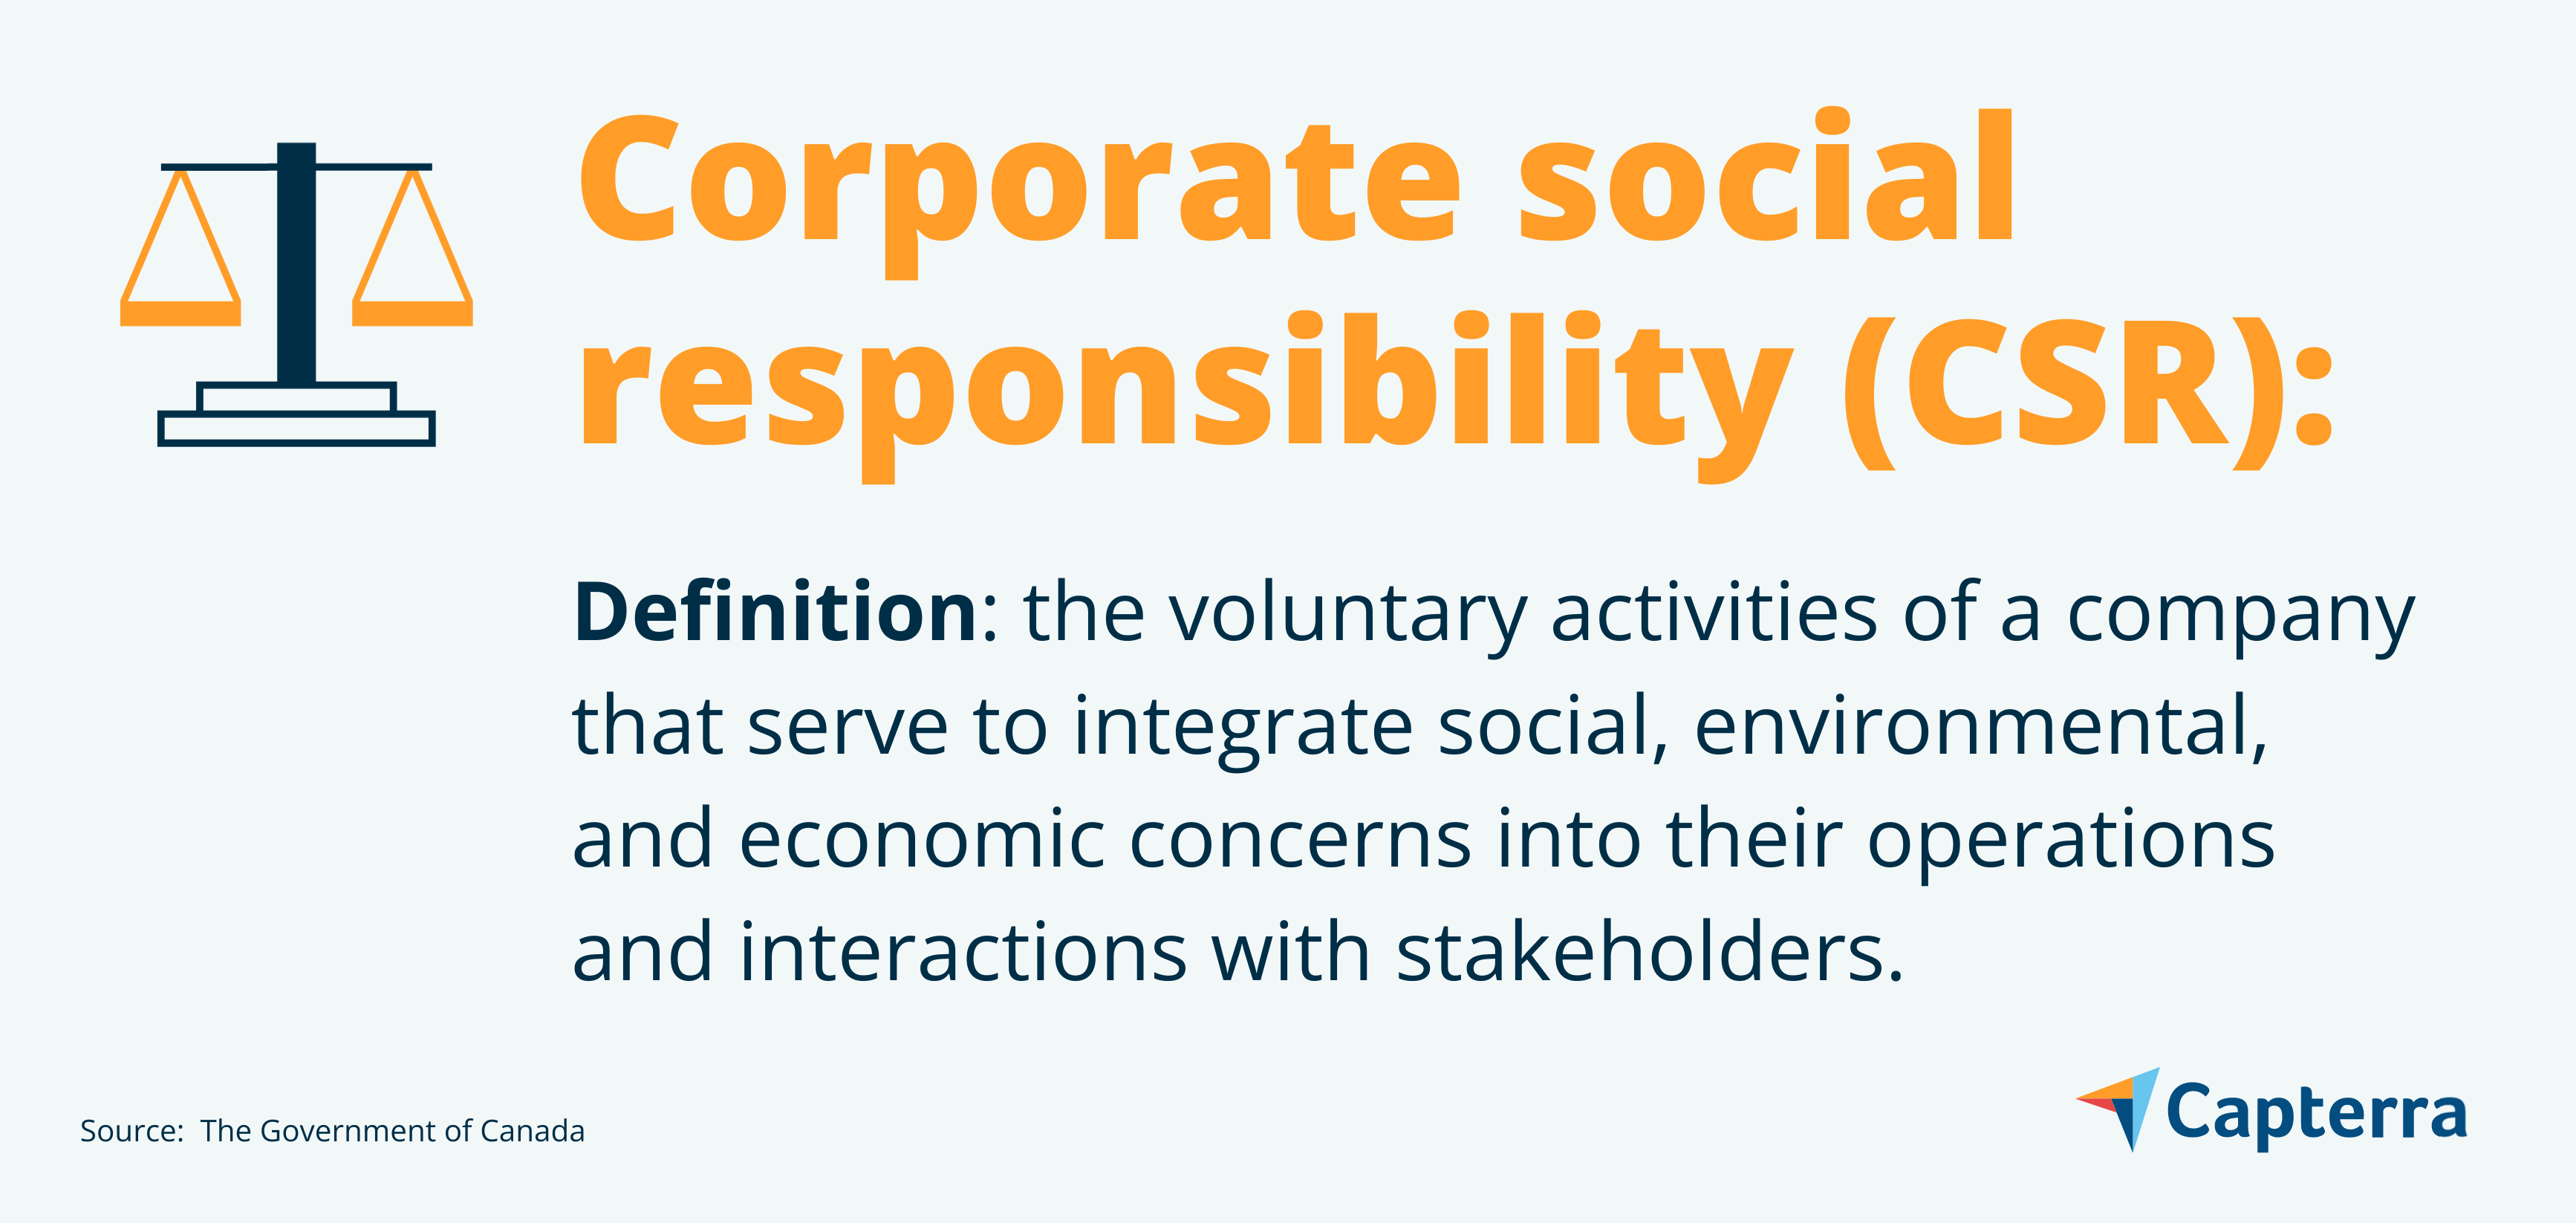 the definition of corporate social responsibility is a company’s voluntary commitment to include social, environmental and economic actions in their operations and interactions with stakeholders 